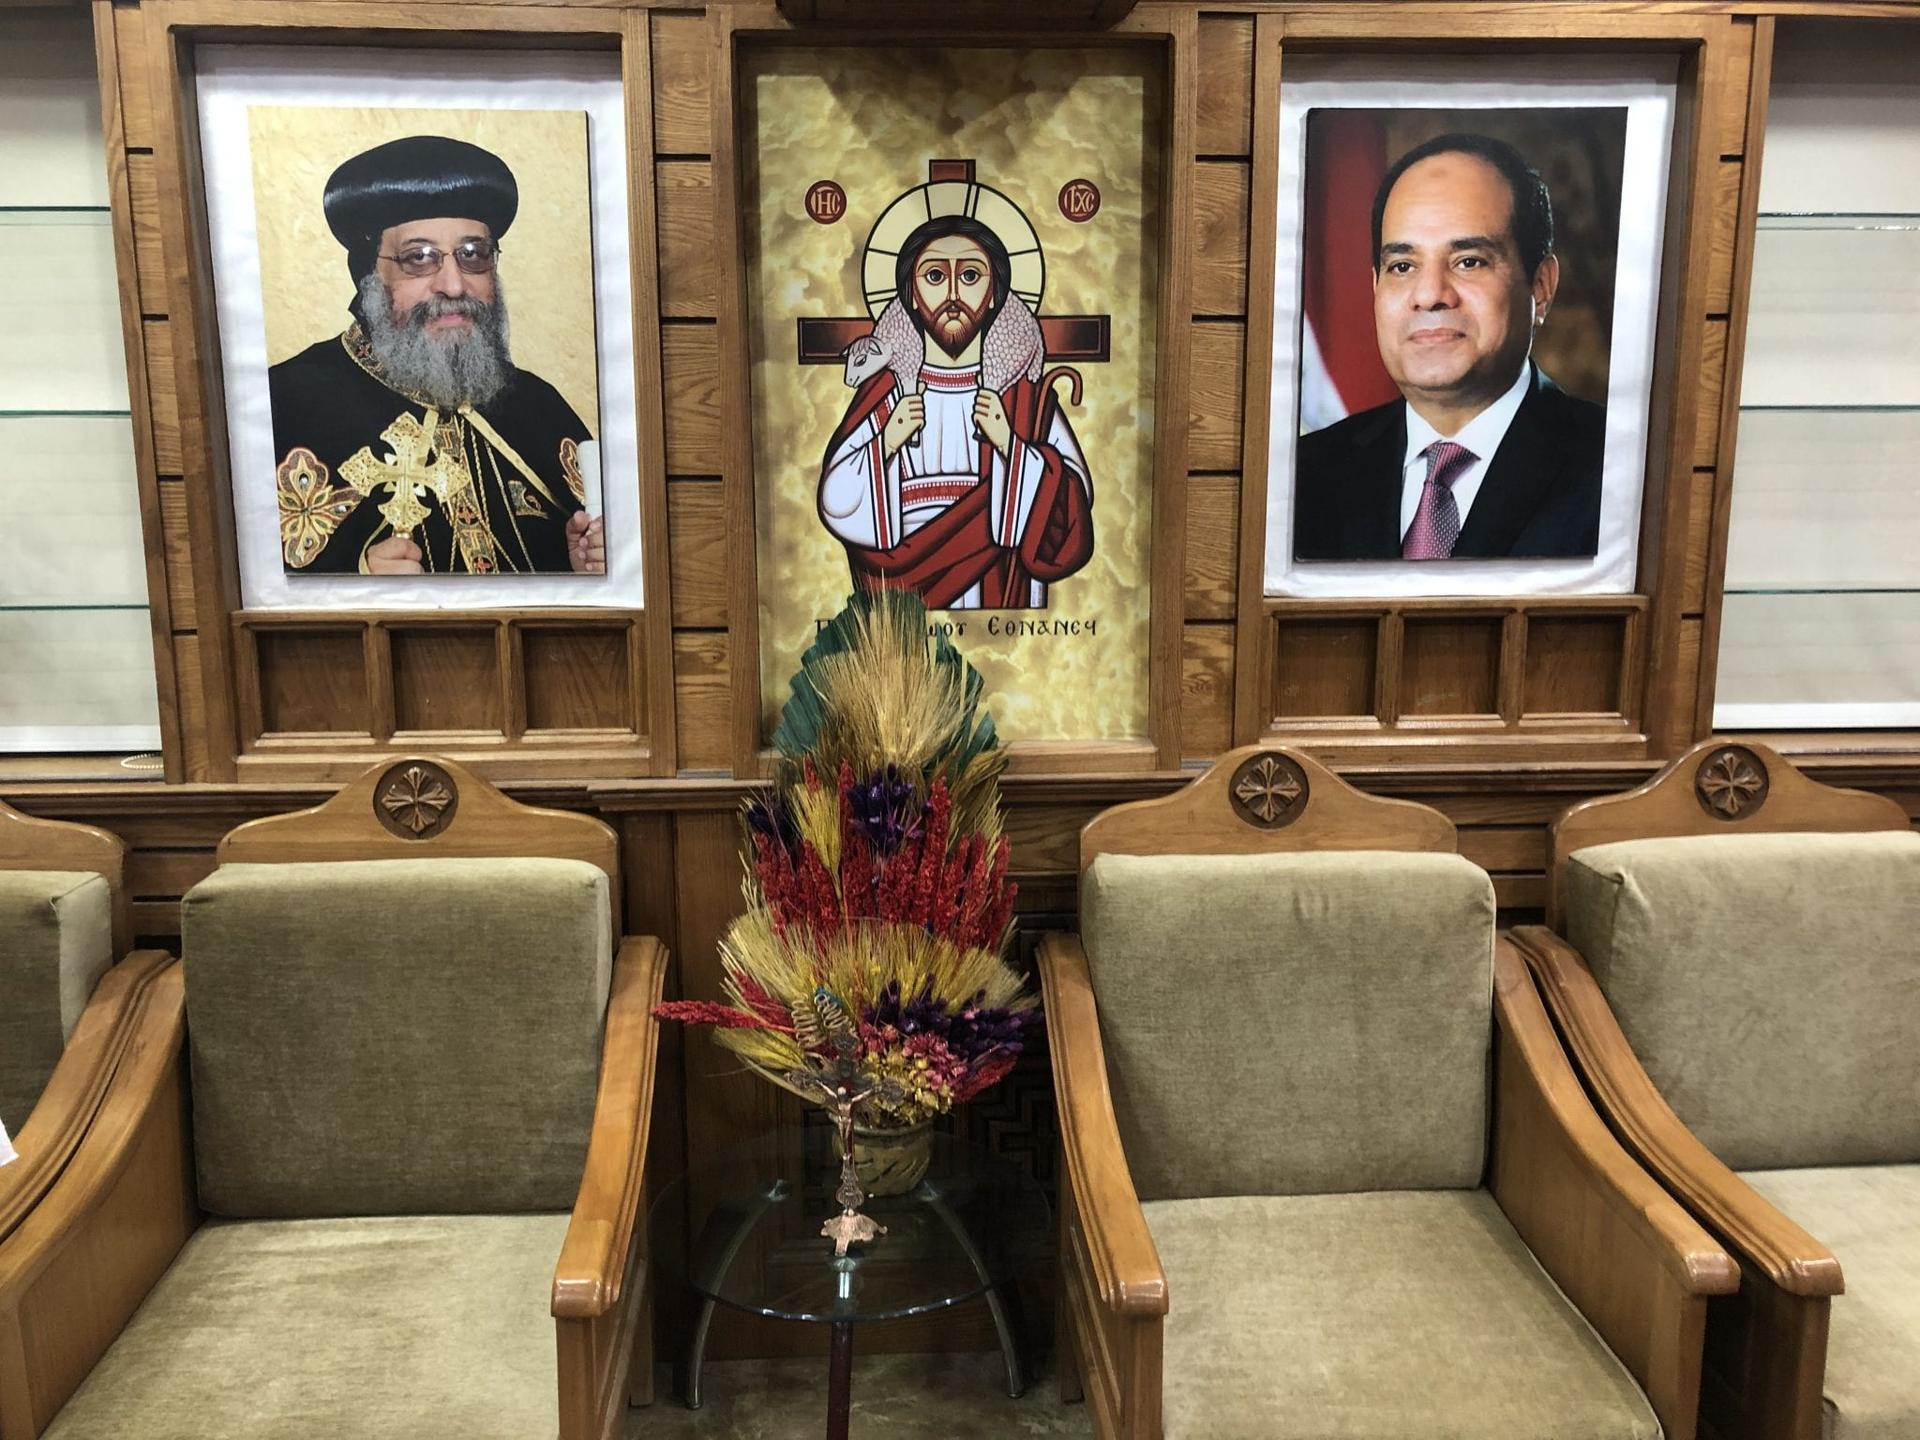 Christian leaders in Egypt reflect on persecution of Coptic minority